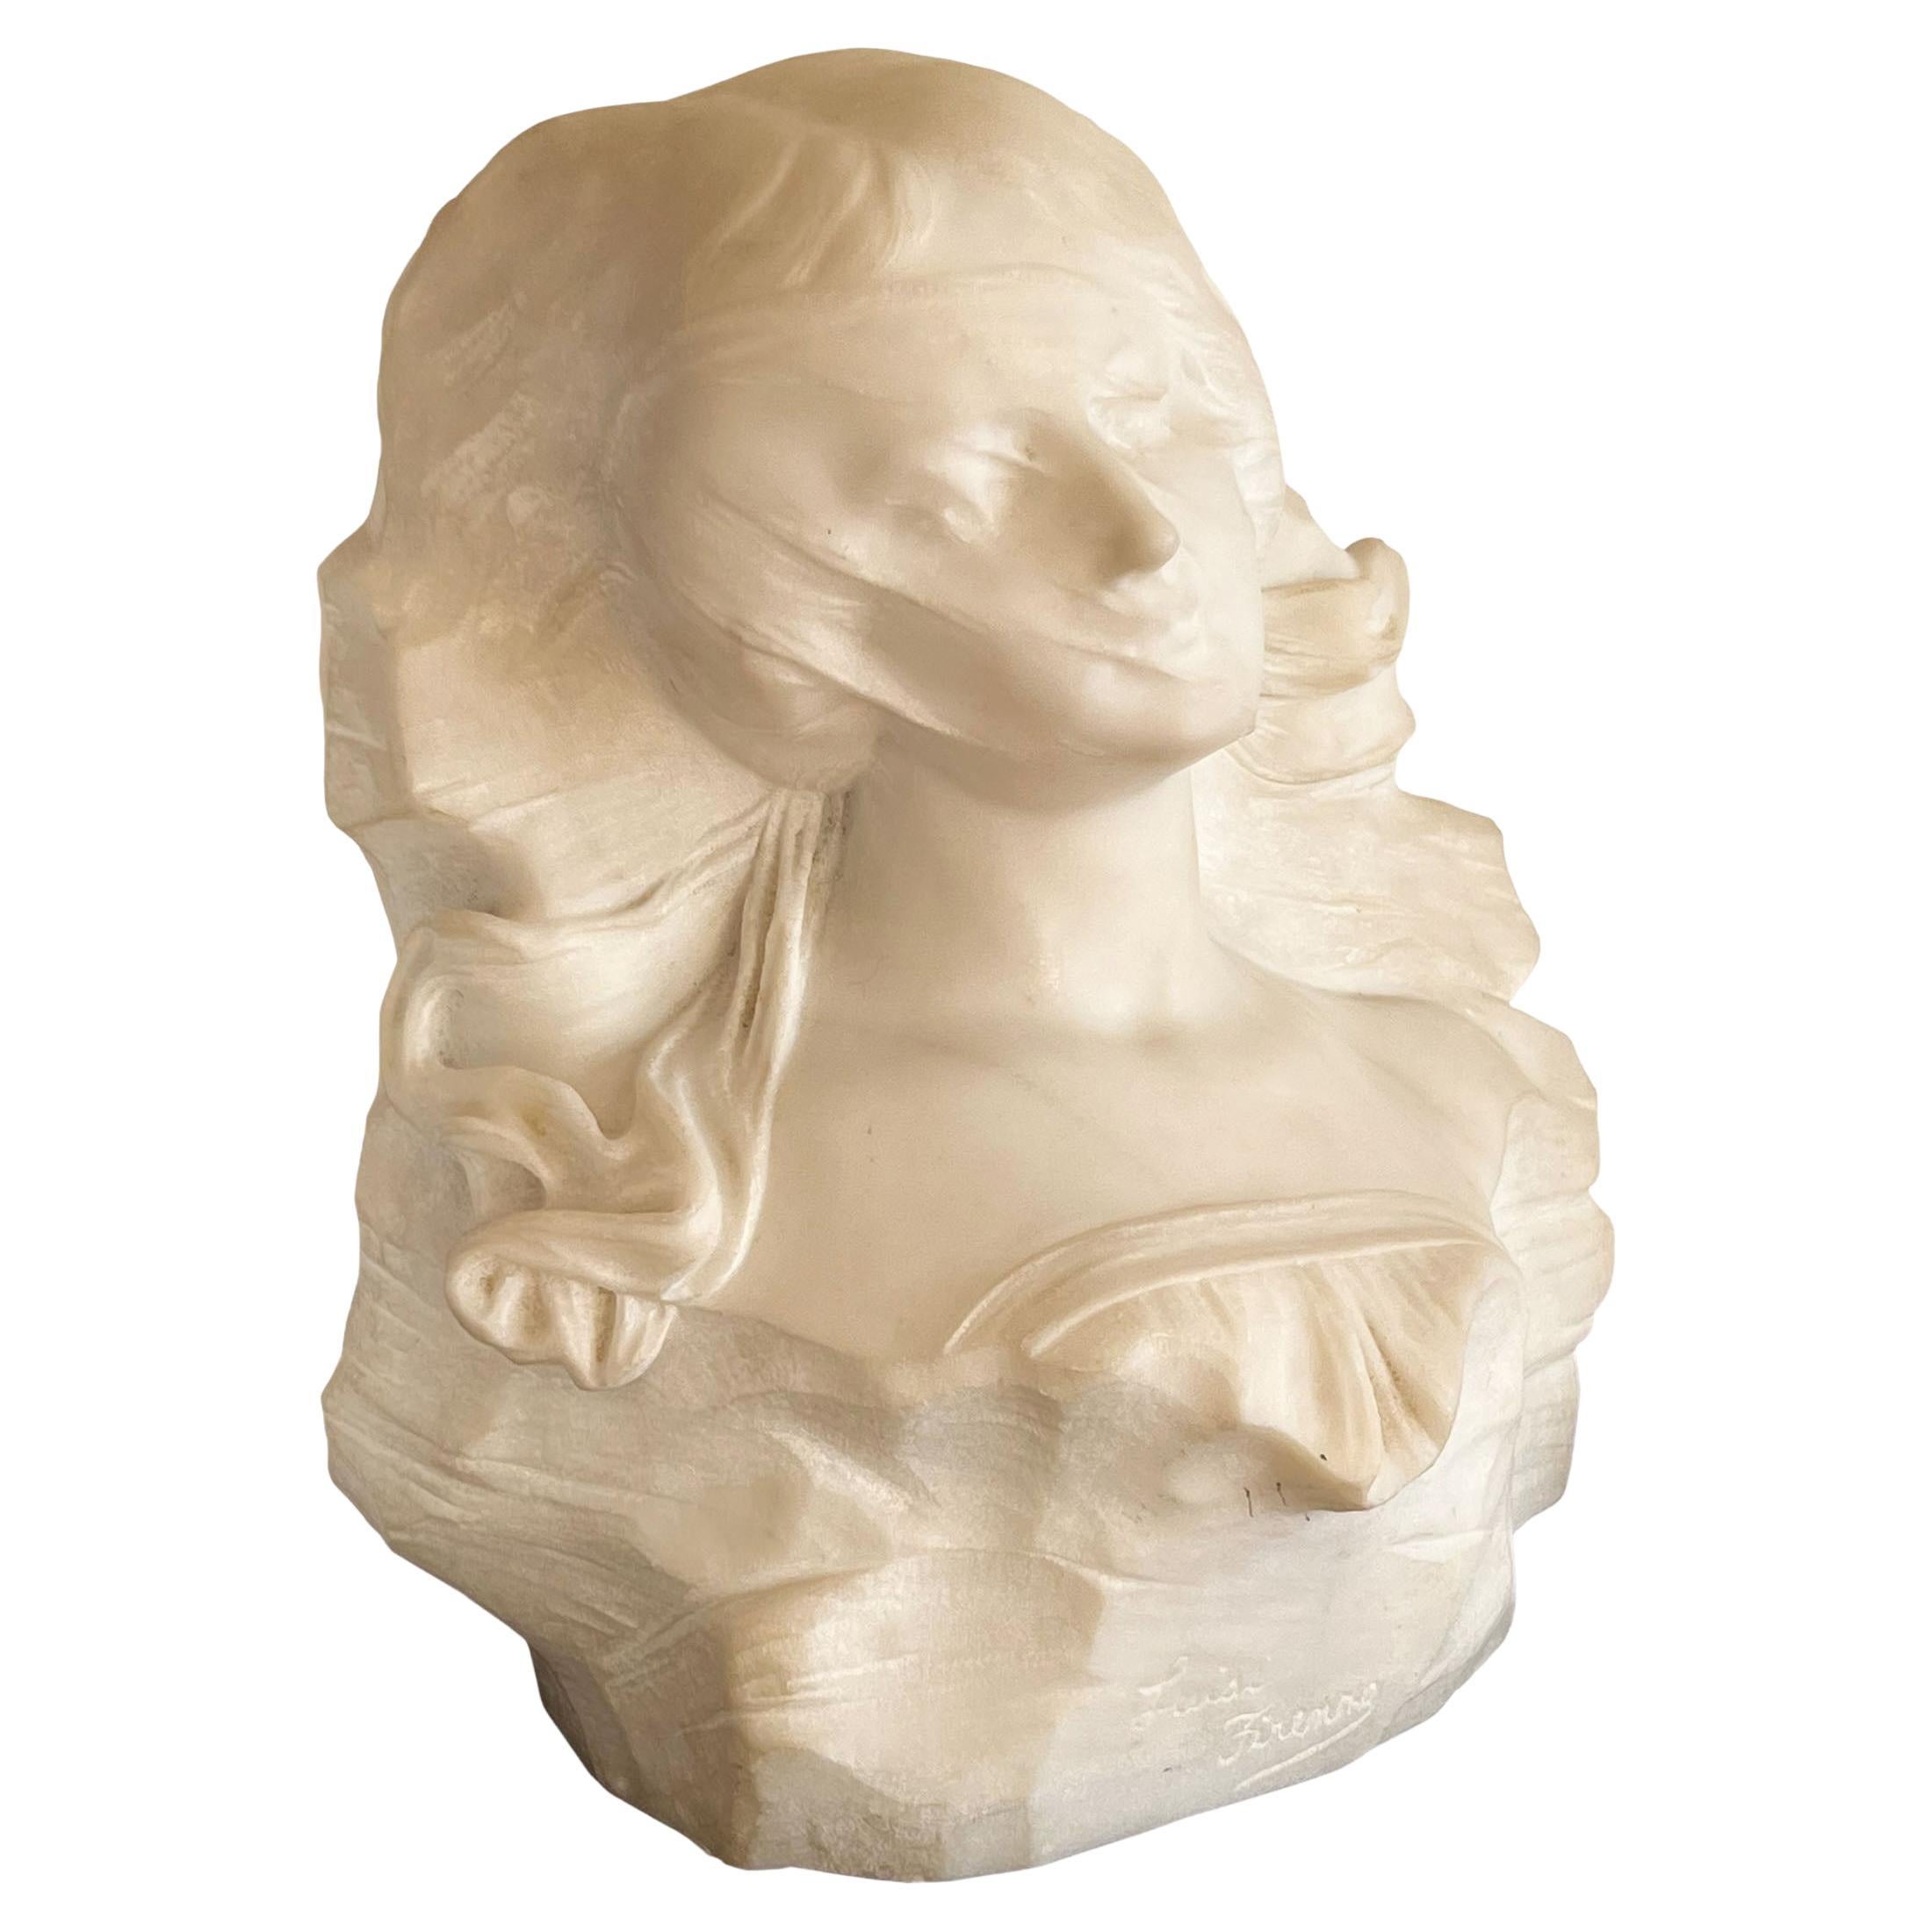 An Italian artist signed 19th century marble bust of a lady. Wearing a ruffled top with a veil partially covering her face. Signed.